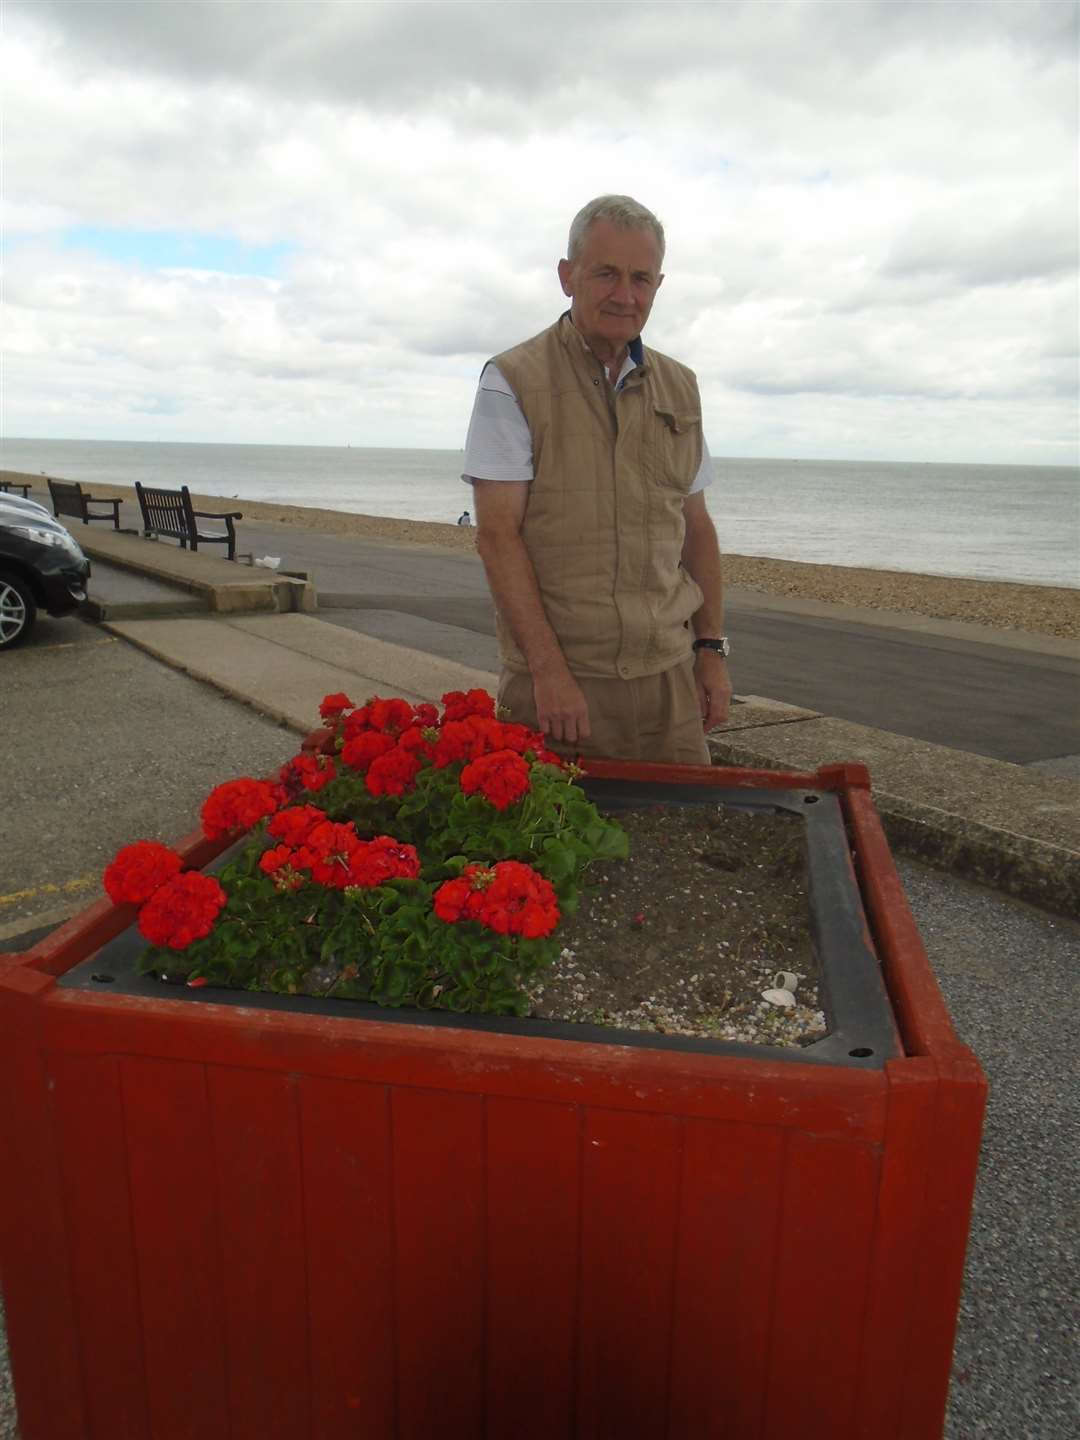 Cllr Trevor Bond is concerned that flower boxes planted by Castle Community students have been vandalised